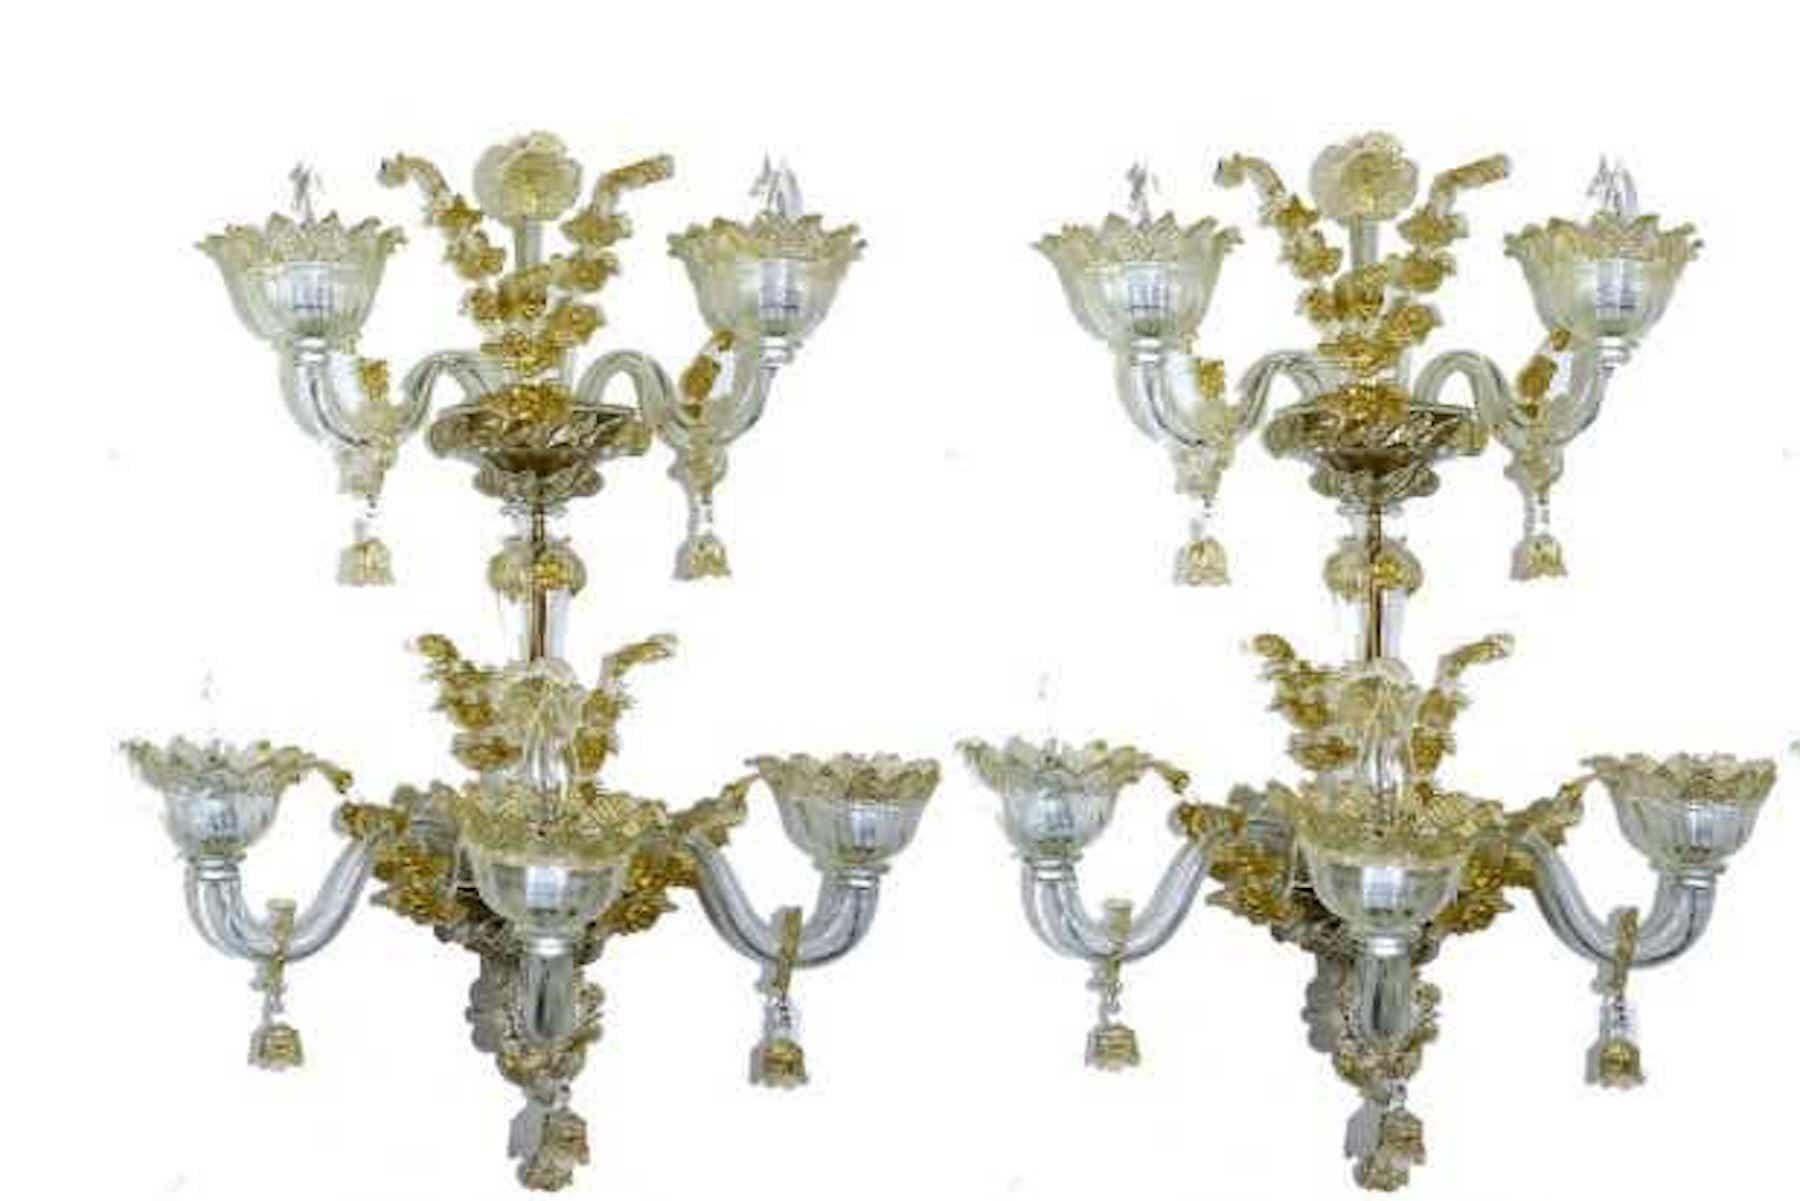 A pair of Venetian Italian gold infused Murano glass sconces, three pair available
Attributed to the Salviati glass works
Each one of large scale two-tier design, of clear and gold infused floral Murano glass, fitted with five-lights each, A rare